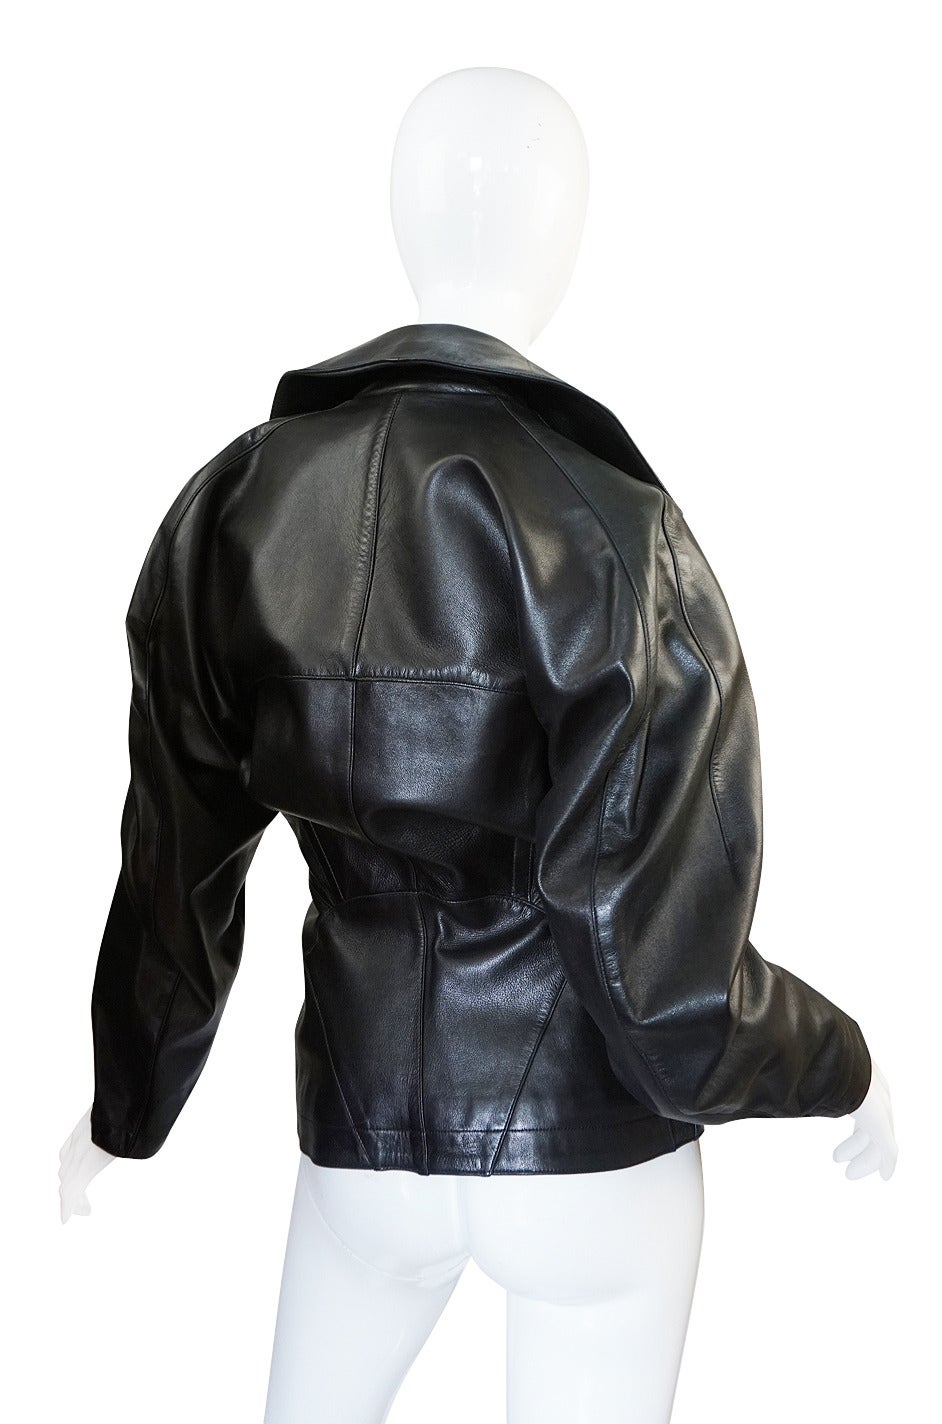 I don't think there has been a season more appropriate to bring this amazing little Azzedine Alaia black leather jacket back to life in. It is the perfect topper to just about anything and will add that chic and sexy edge to any outfit. Azzedine is